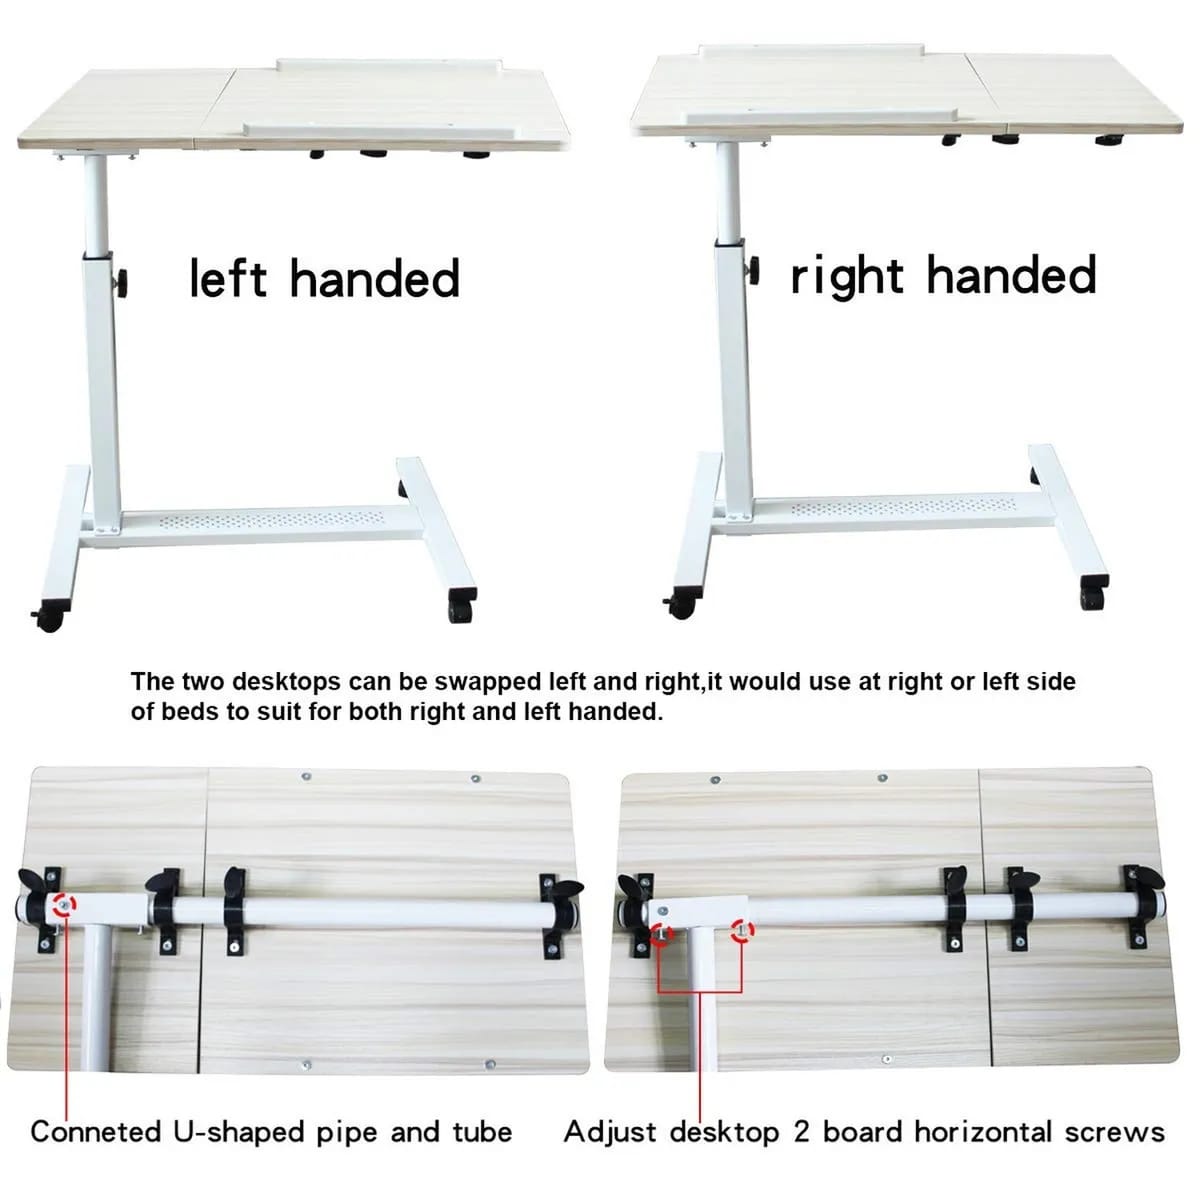 Adjustable Overbed Laptop Stand Table with two interchangeable desktops, allowing for left and right side placement to accommodate both right and left-handed users